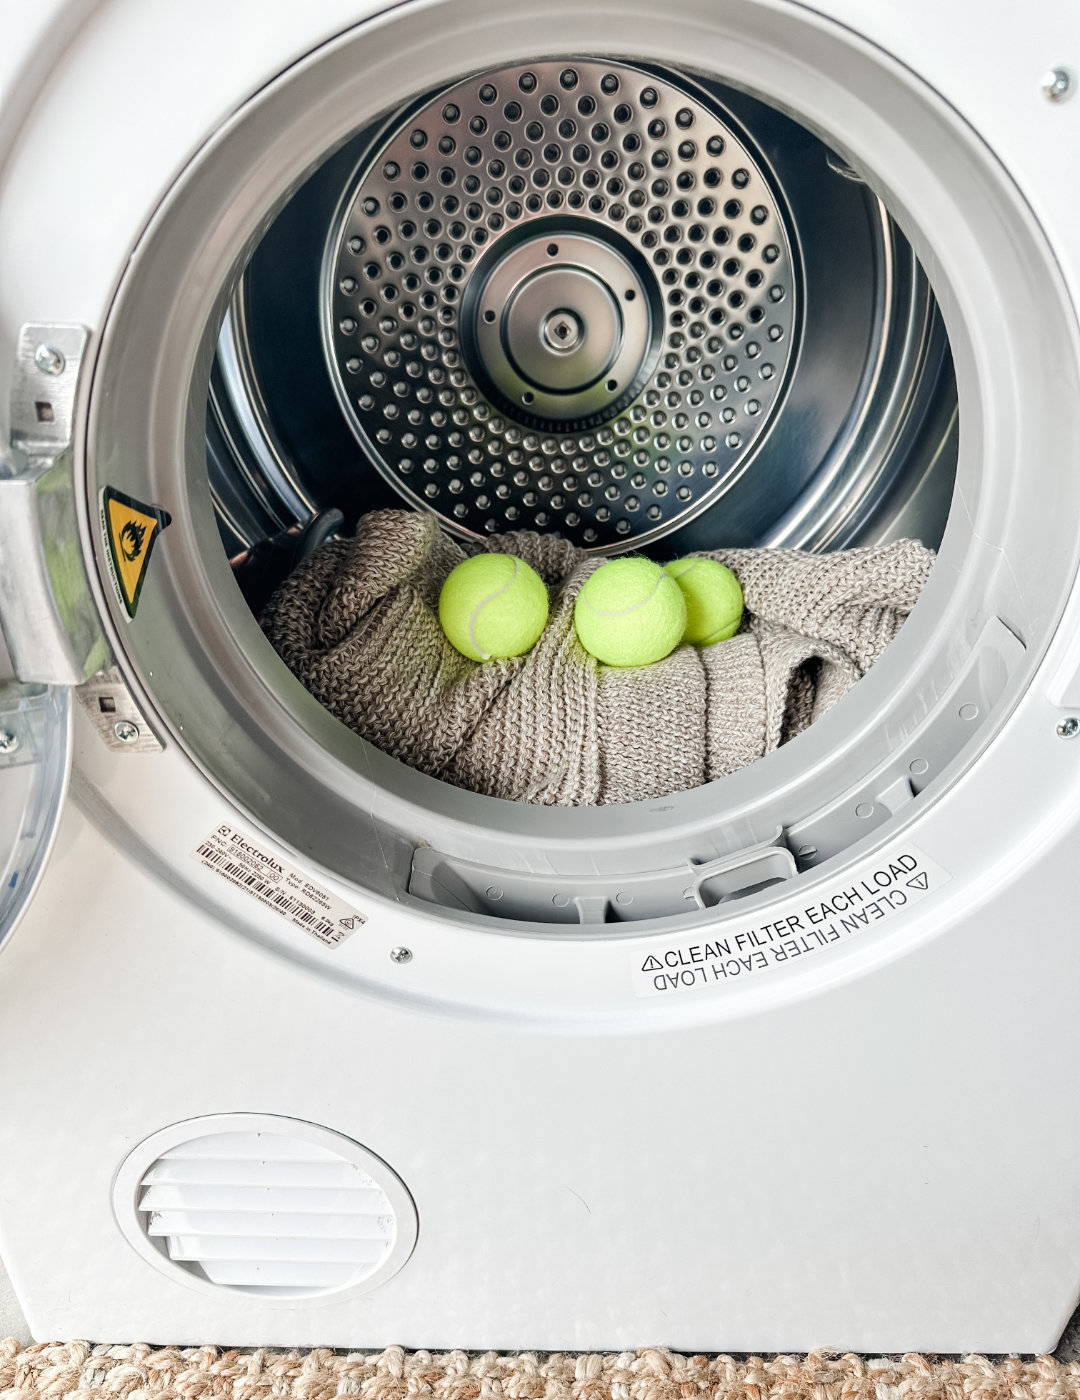 5 Laundry Hacks Sorting, Ironing, and More - Lou Lou Girls